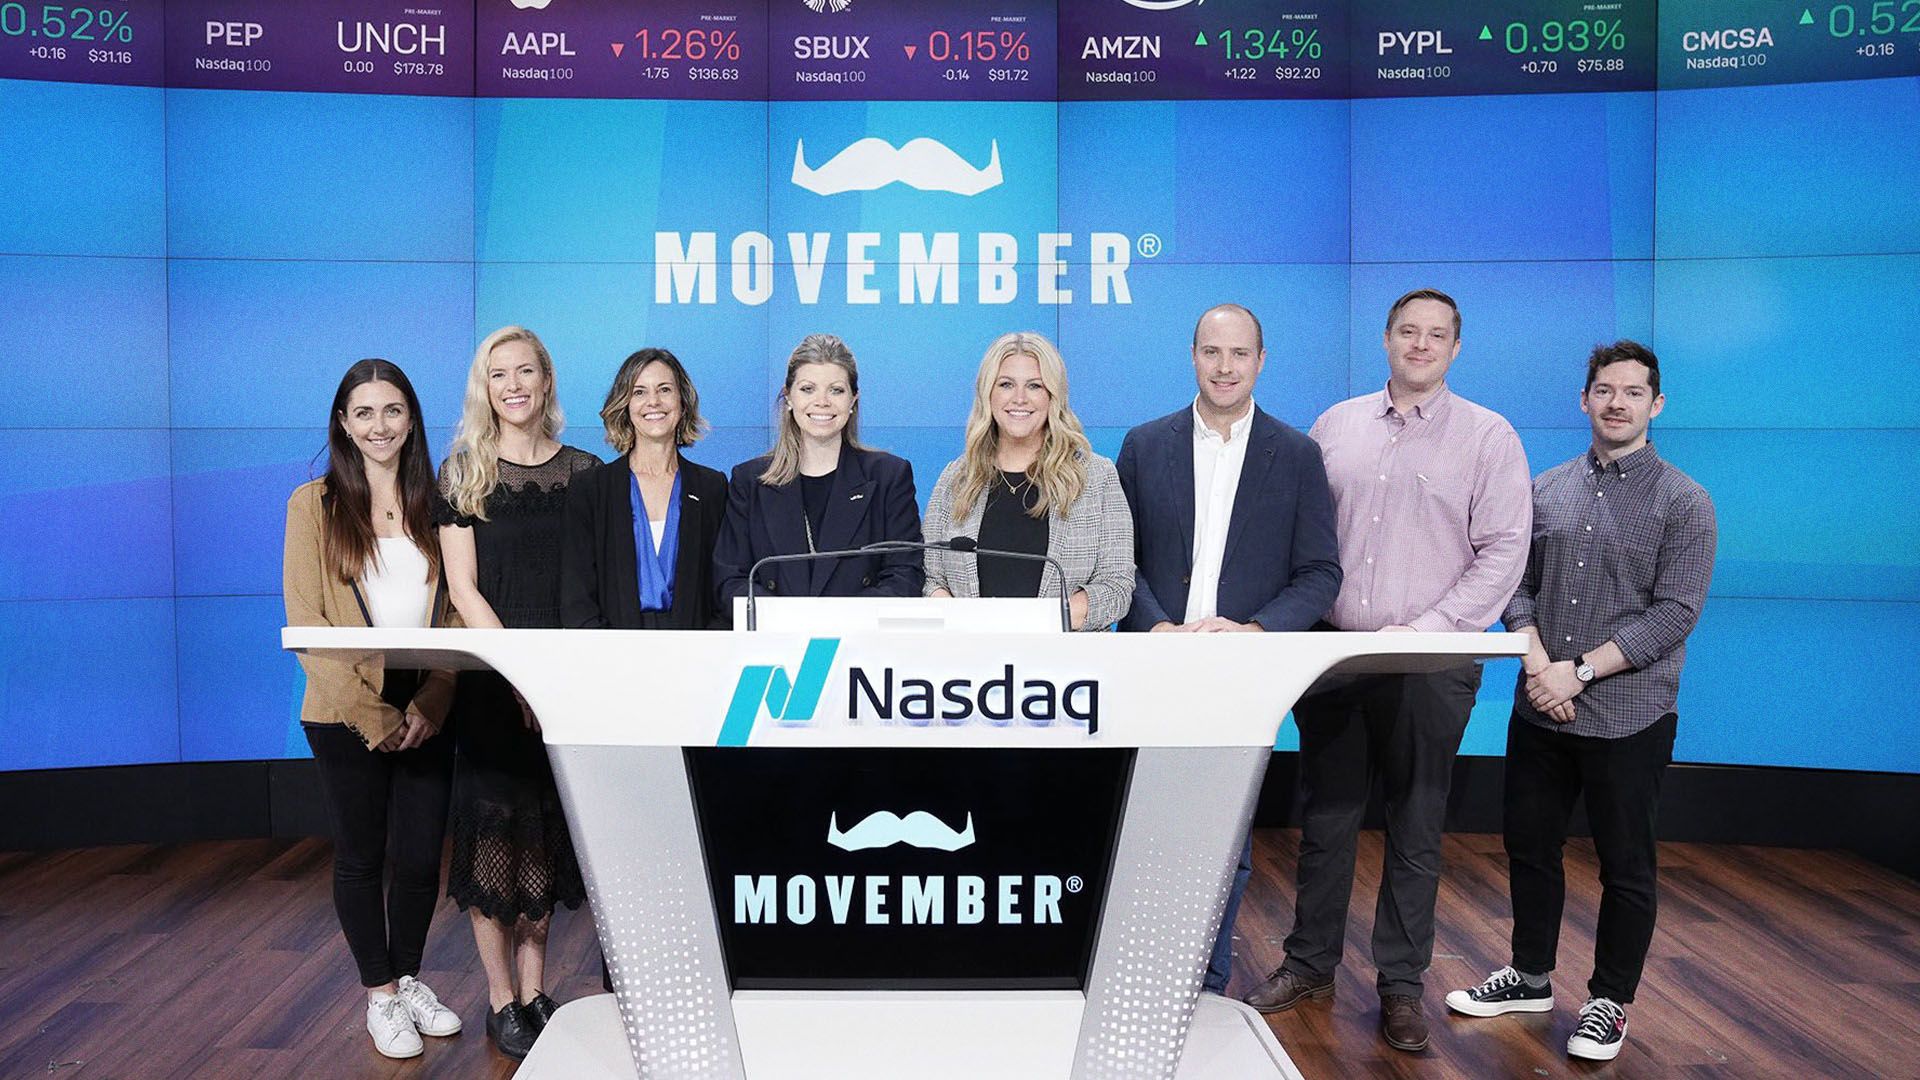 Photo of a group of smiling people from the Movember charity, excitedly about to ring the NASDAQ bell.